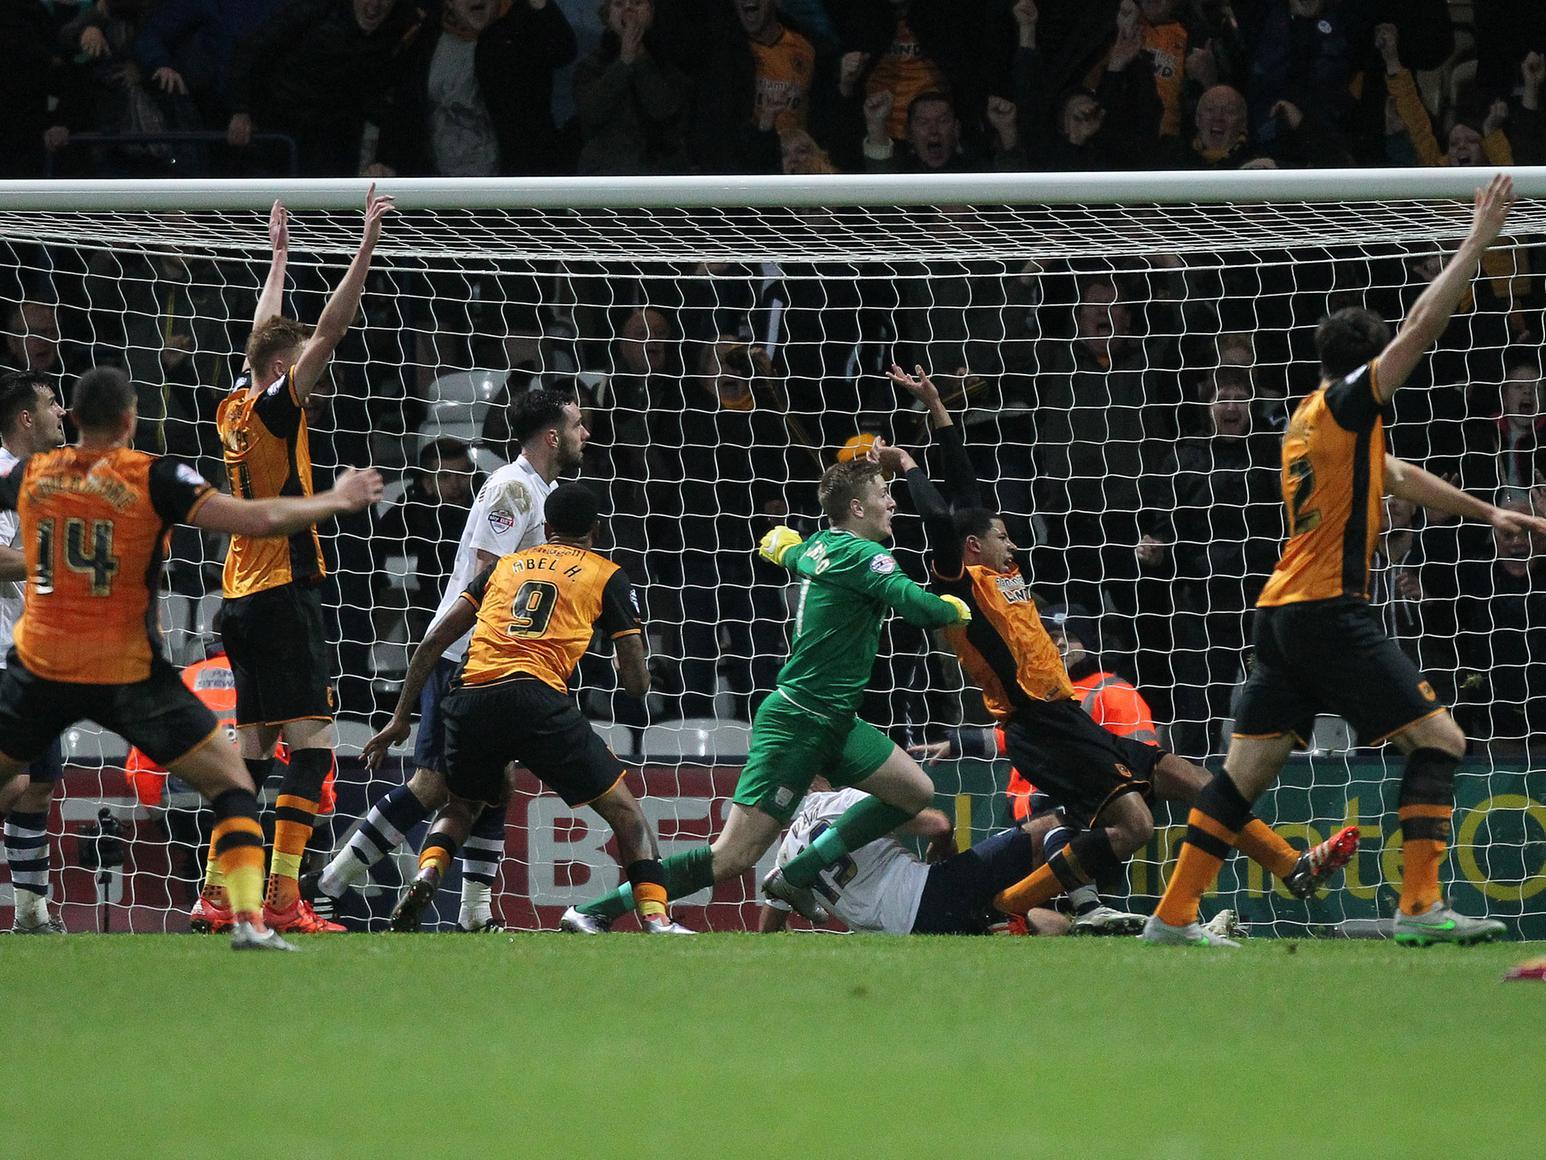 Now in PNE colours, John Welsh clears off the line to prevent Hull from scoring. It proved vital as Paul Gallagher's goal was the only one of the game, giving Preston the win in 2015.